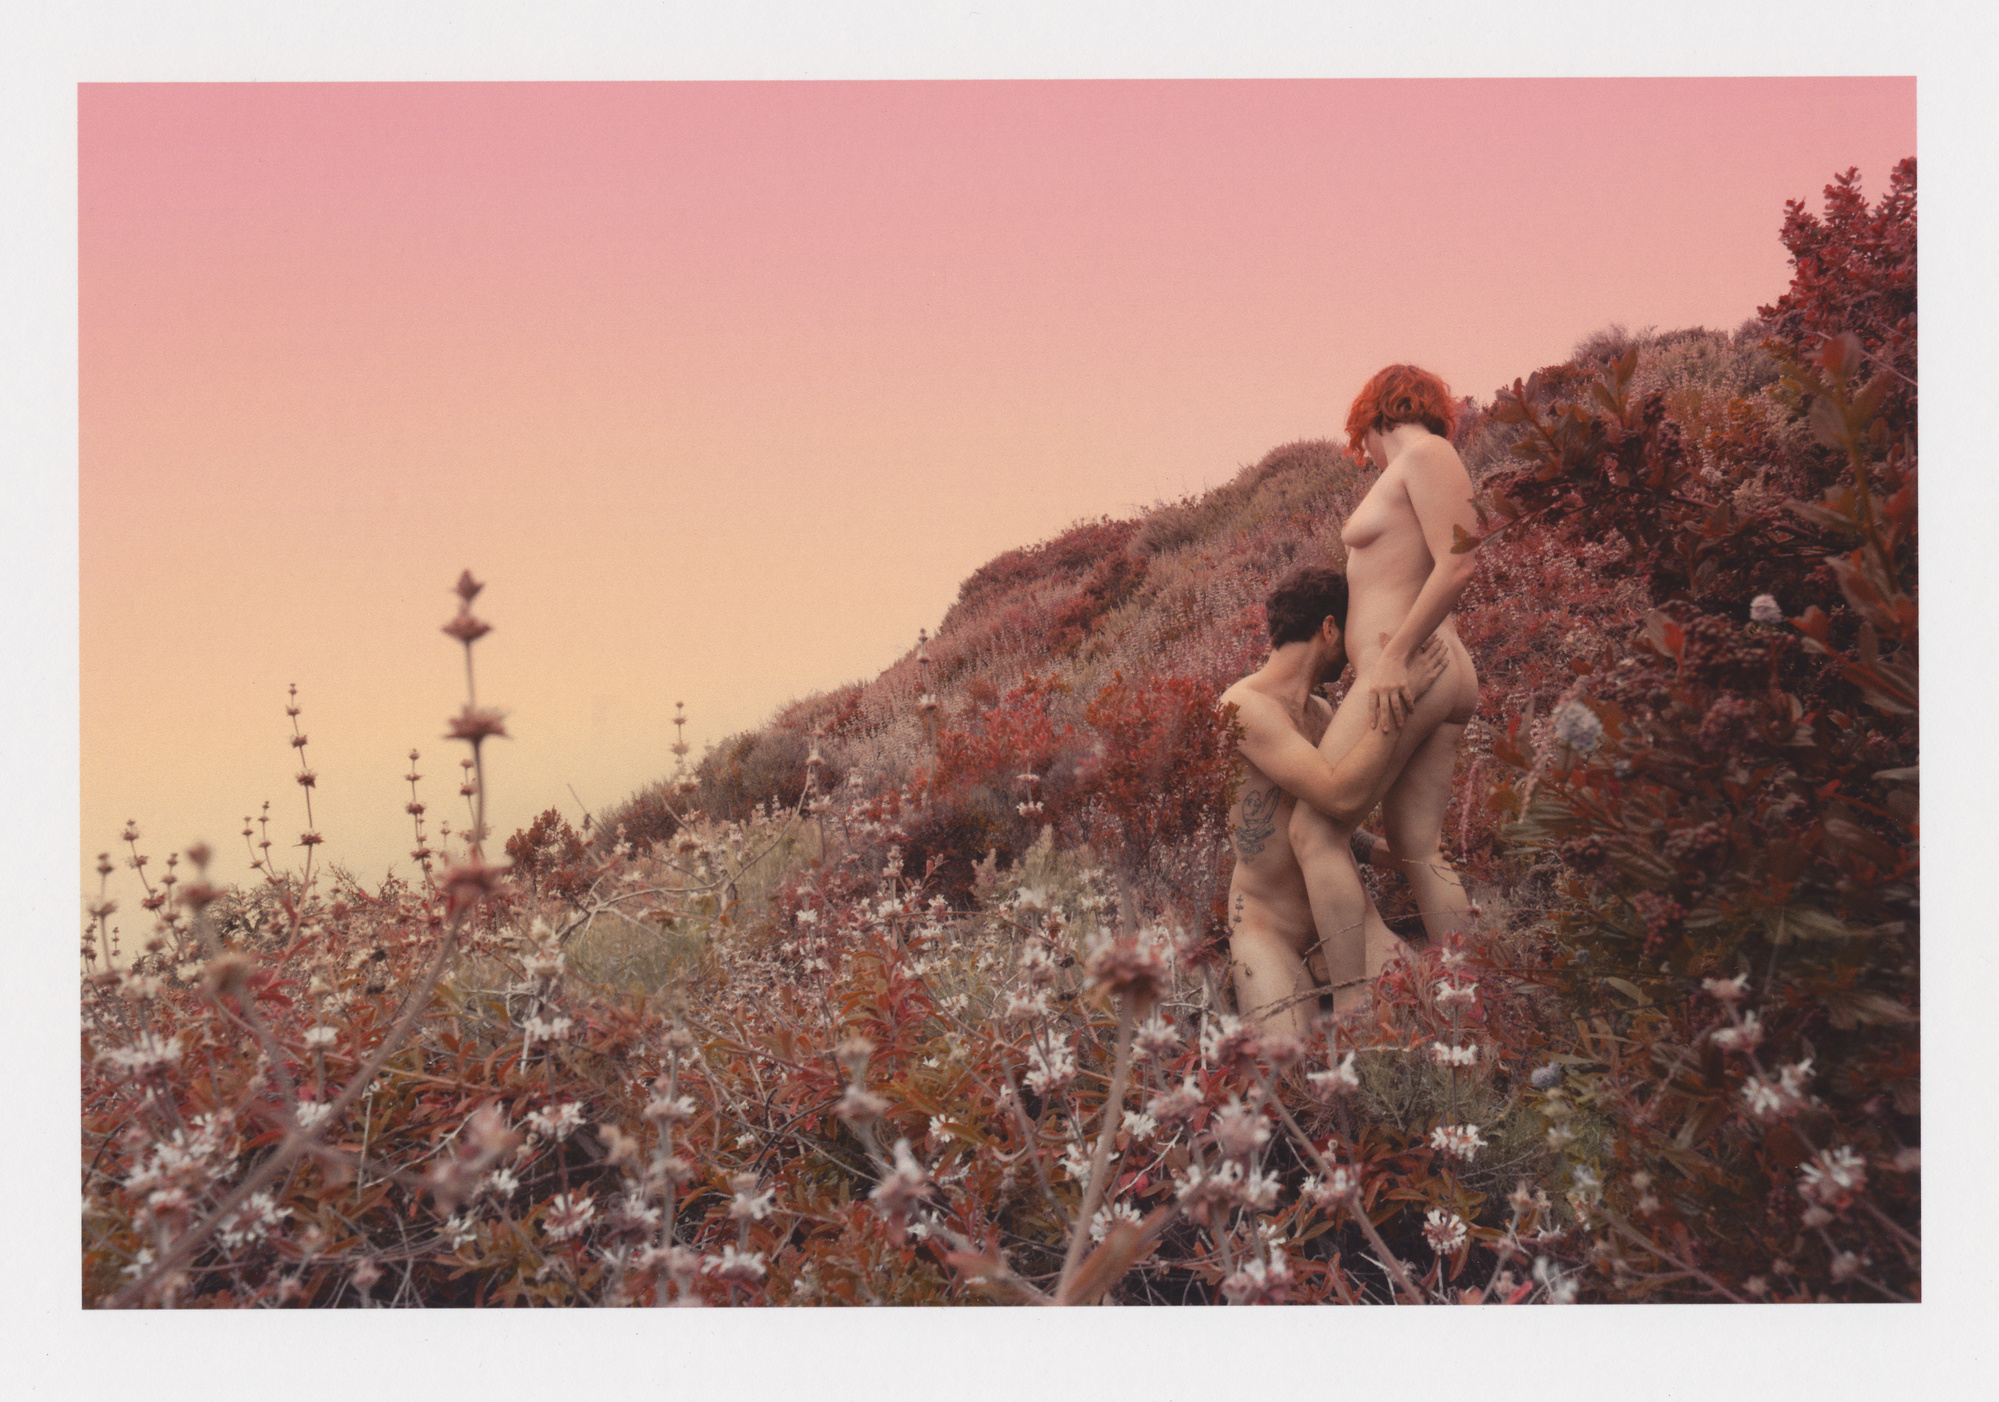 Nude couple stands in flower field against colorful sunset sky in Big Sur, California